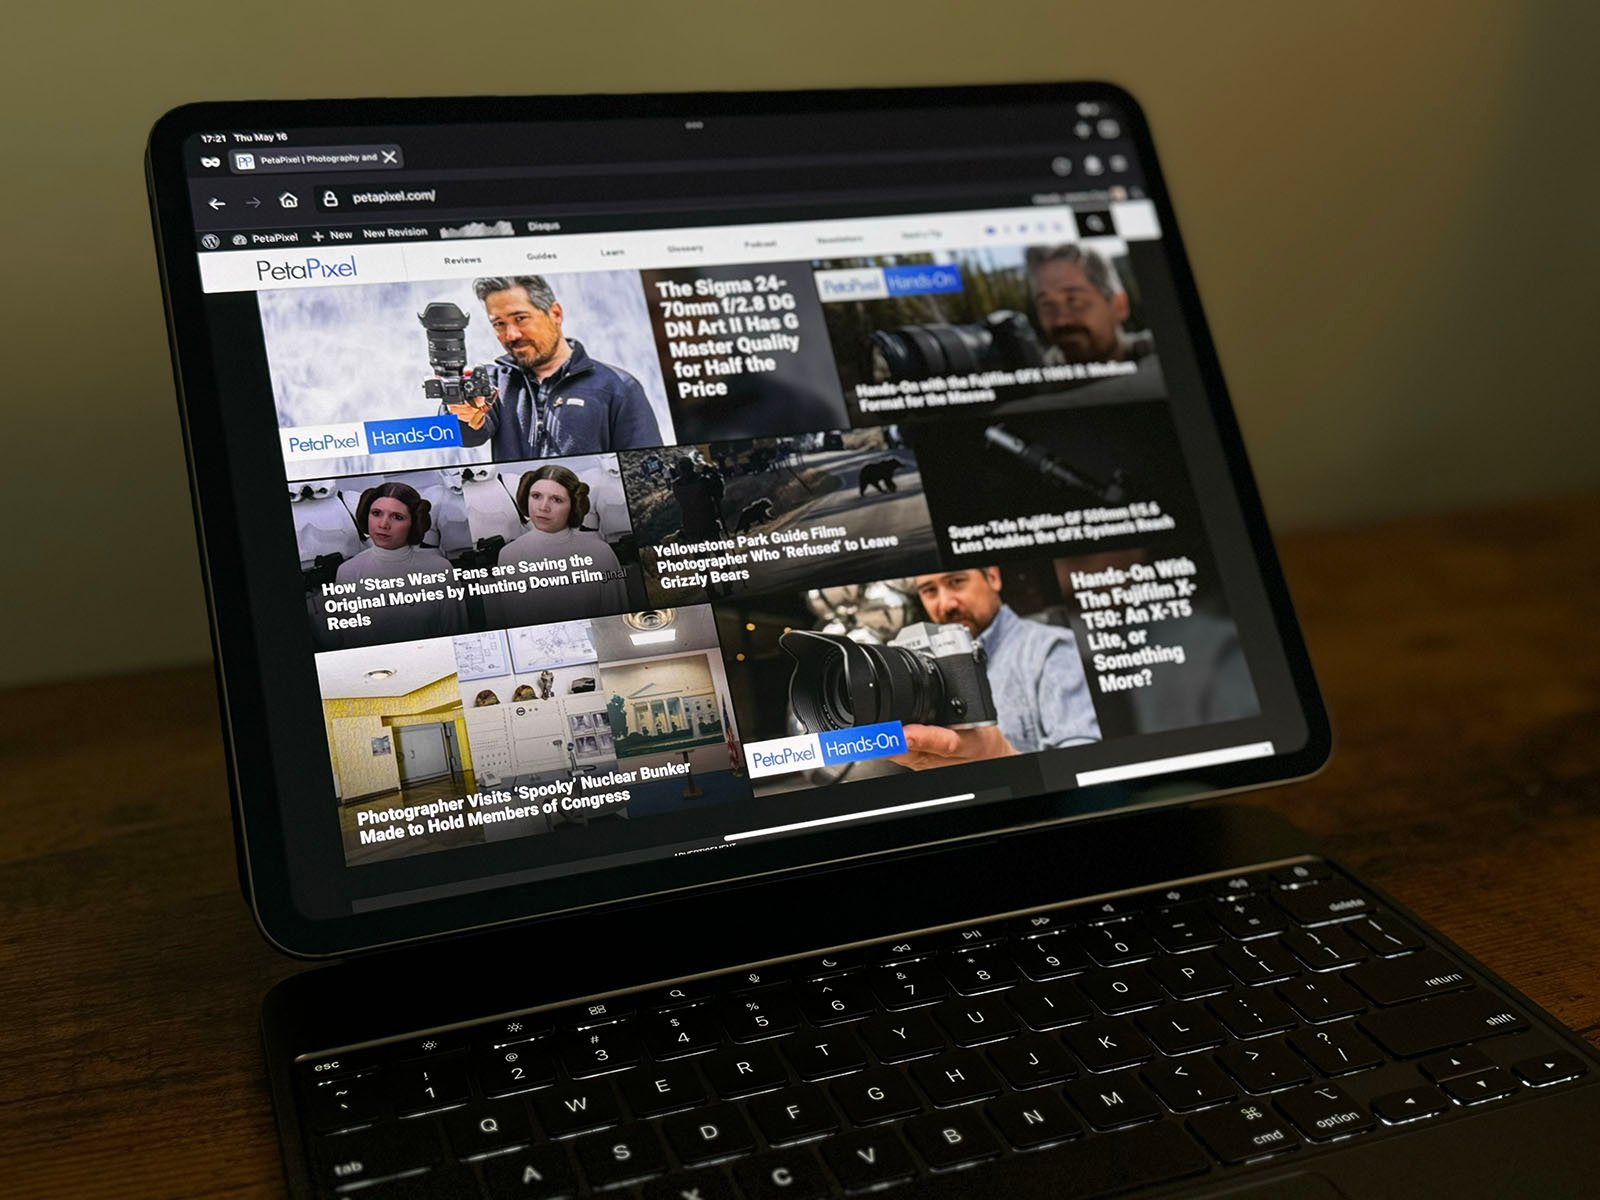 A tablet with an attached keyboard displays a website featuring various photography-related articles. The homepage shows multiple thumbnails of images and headlines, including topics on cameras, photography techniques, and notable photographers.